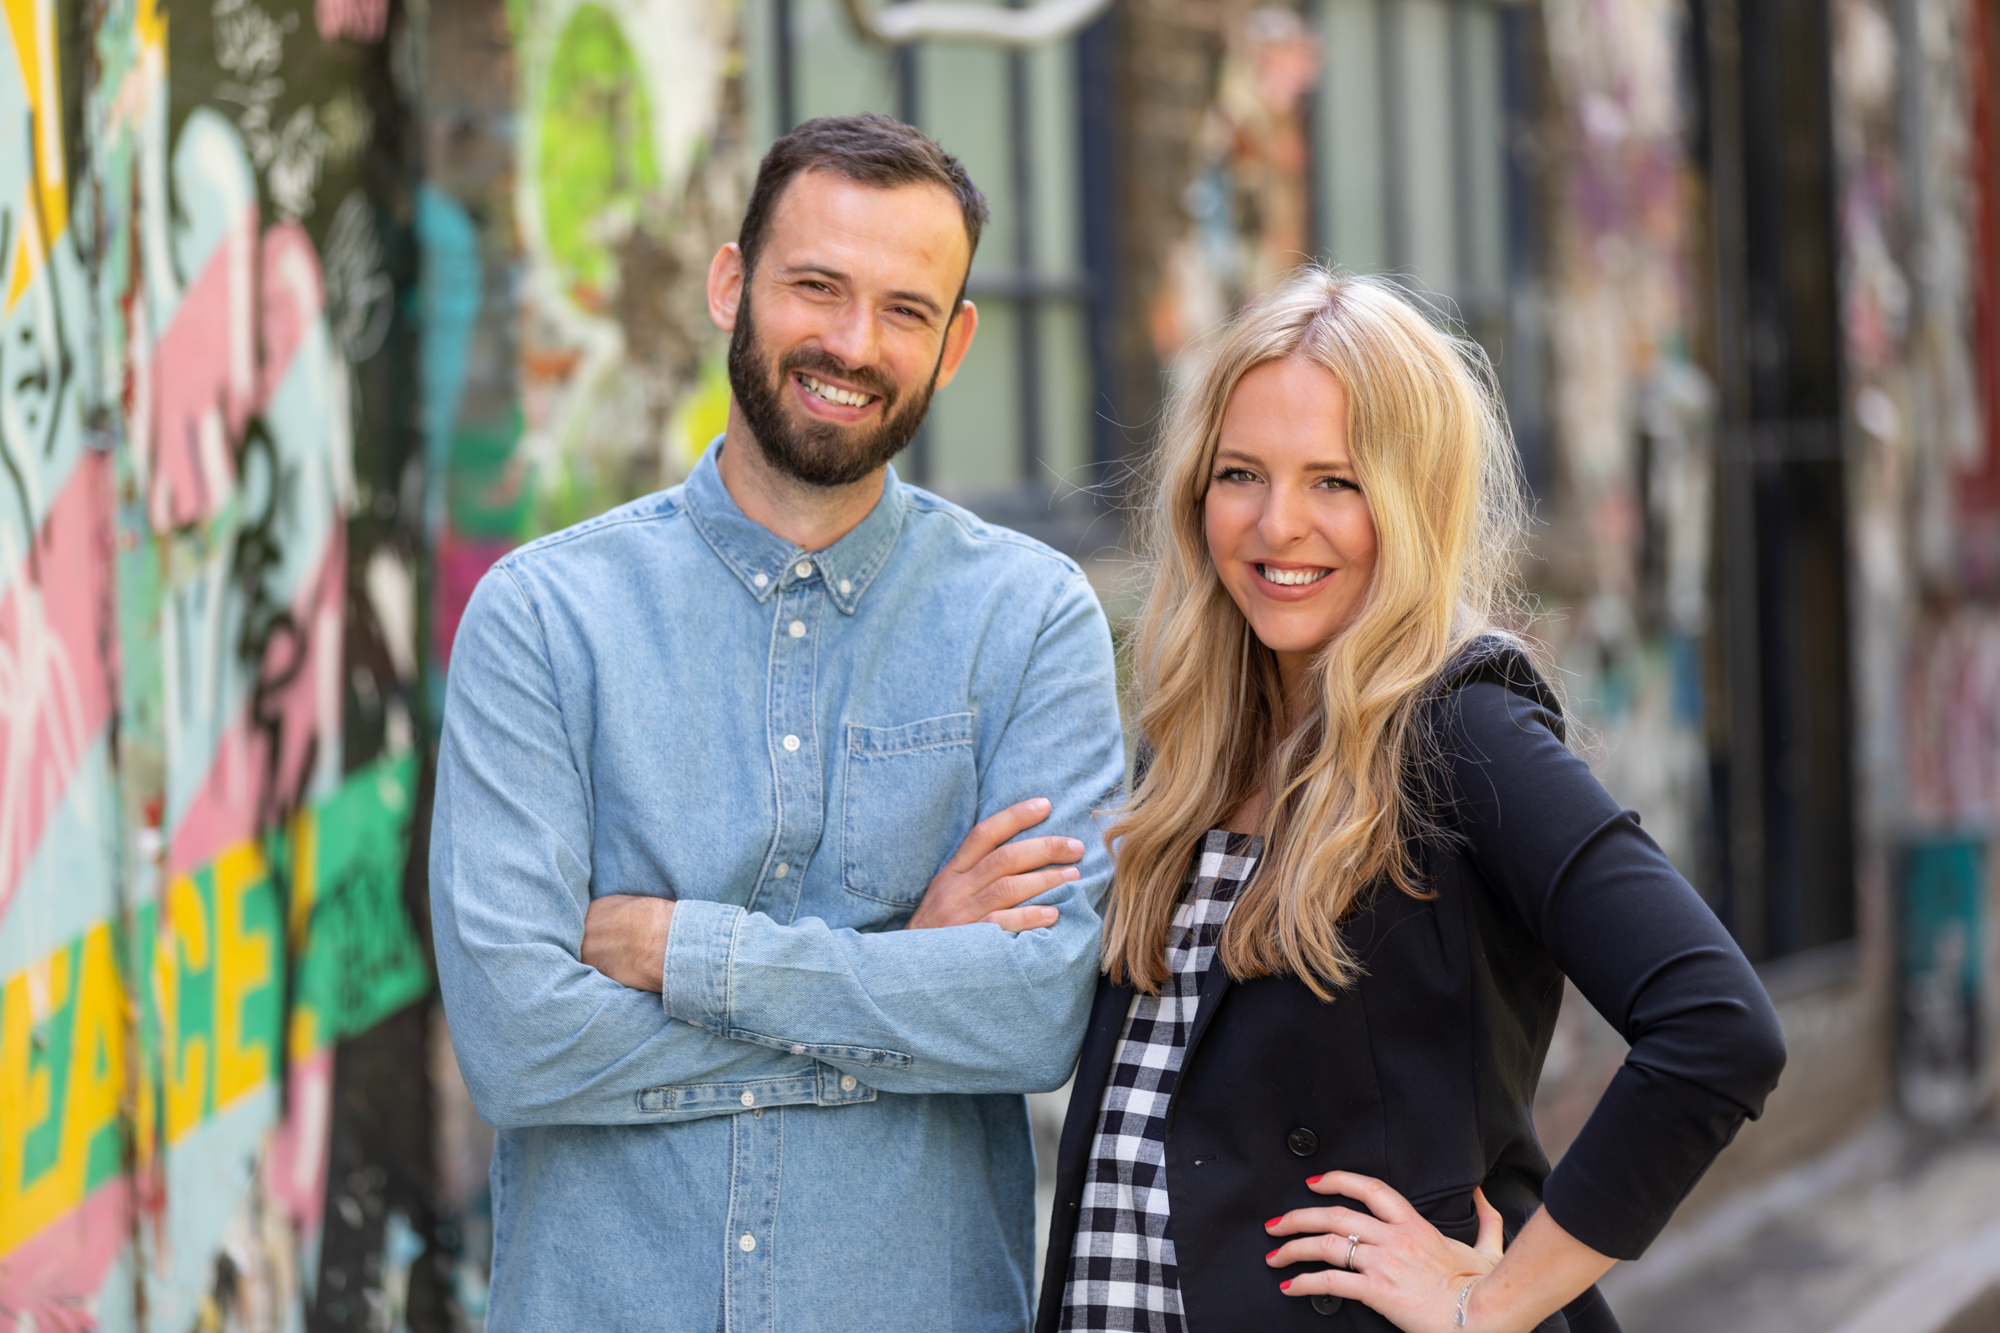 male and female founder of mhf video production company smiling to camera in front of graffiti wall